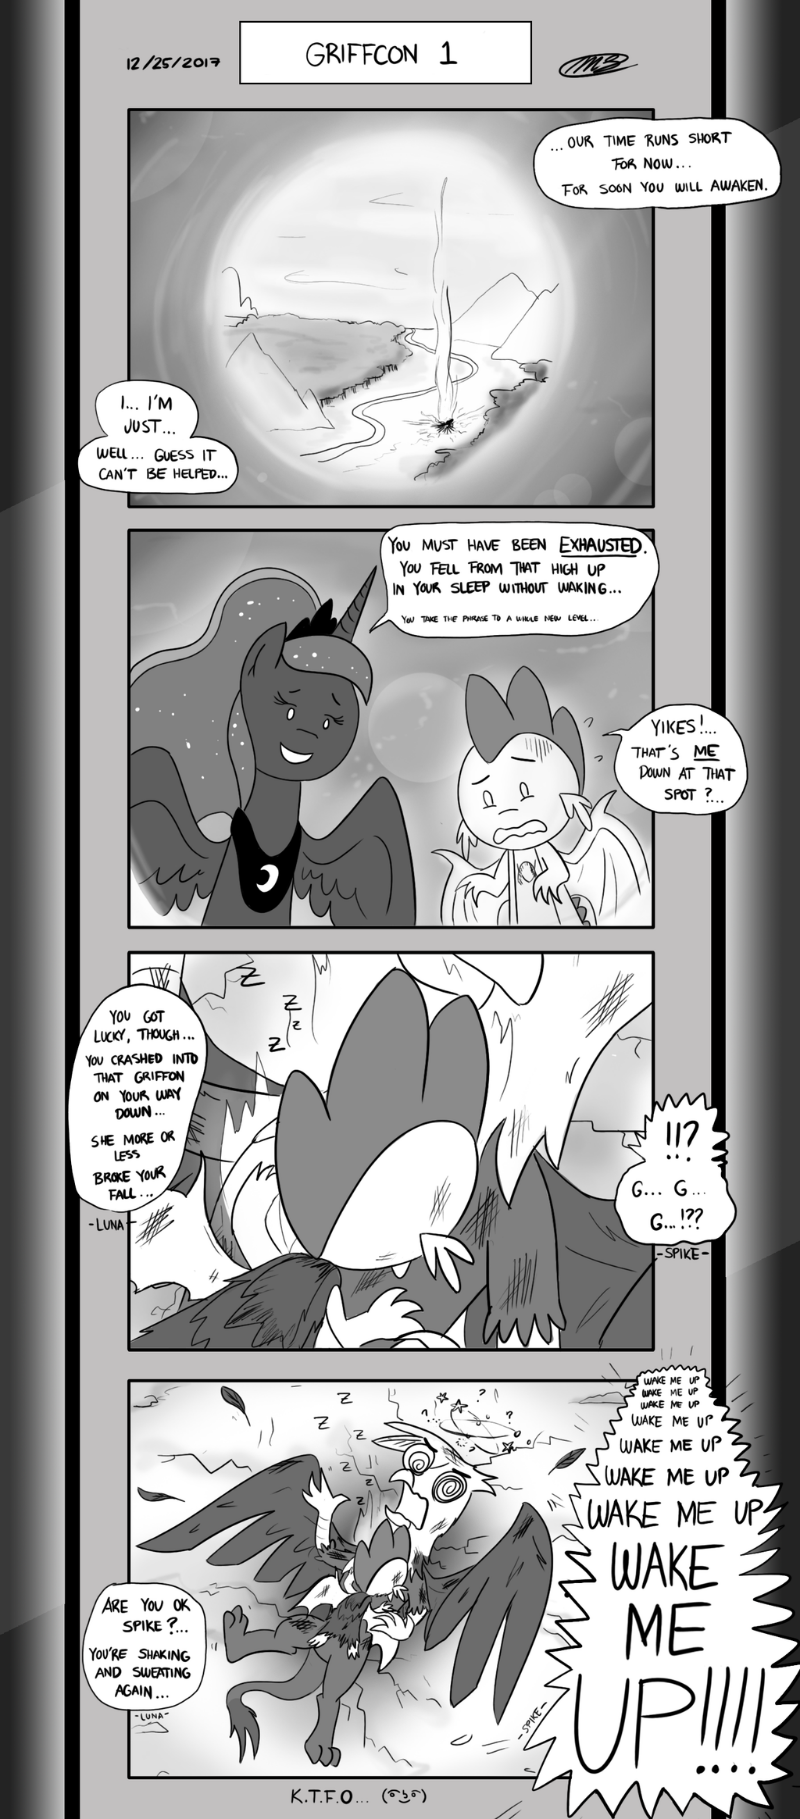 Page 4- GRIFFCON 1